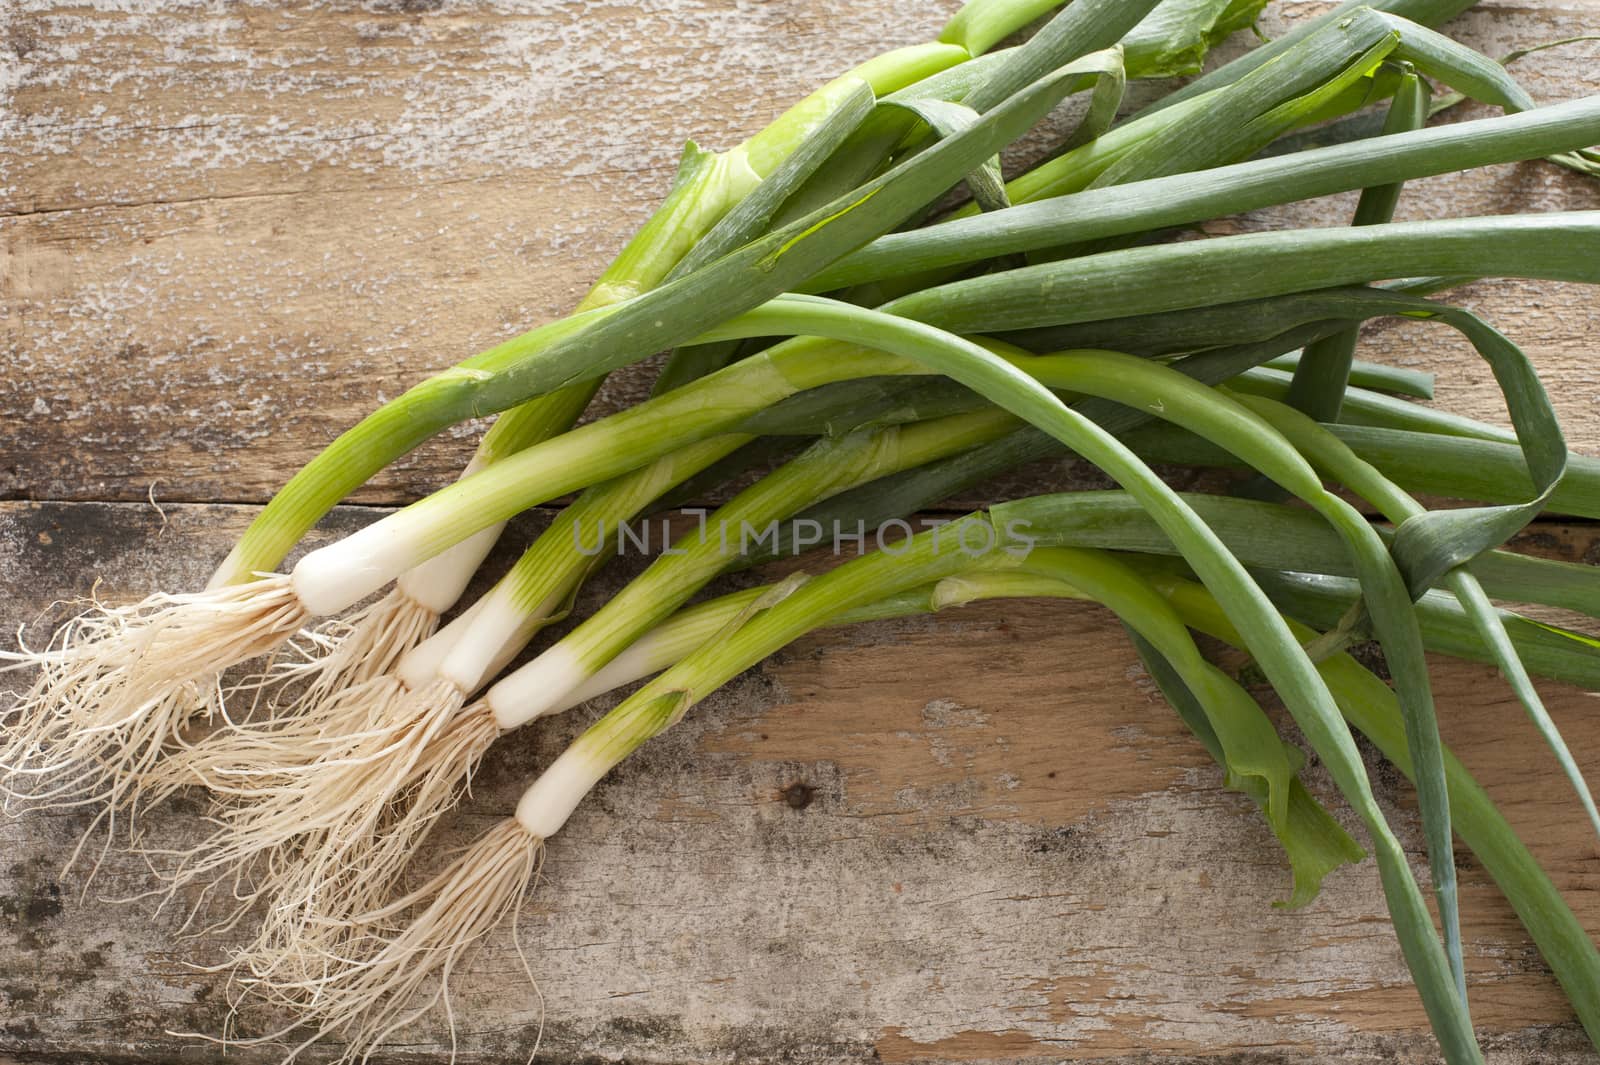 Bunch of fresh green spring onions for a pungent seasoning for salads or cooking lying on a rustic wooden table viewed from above